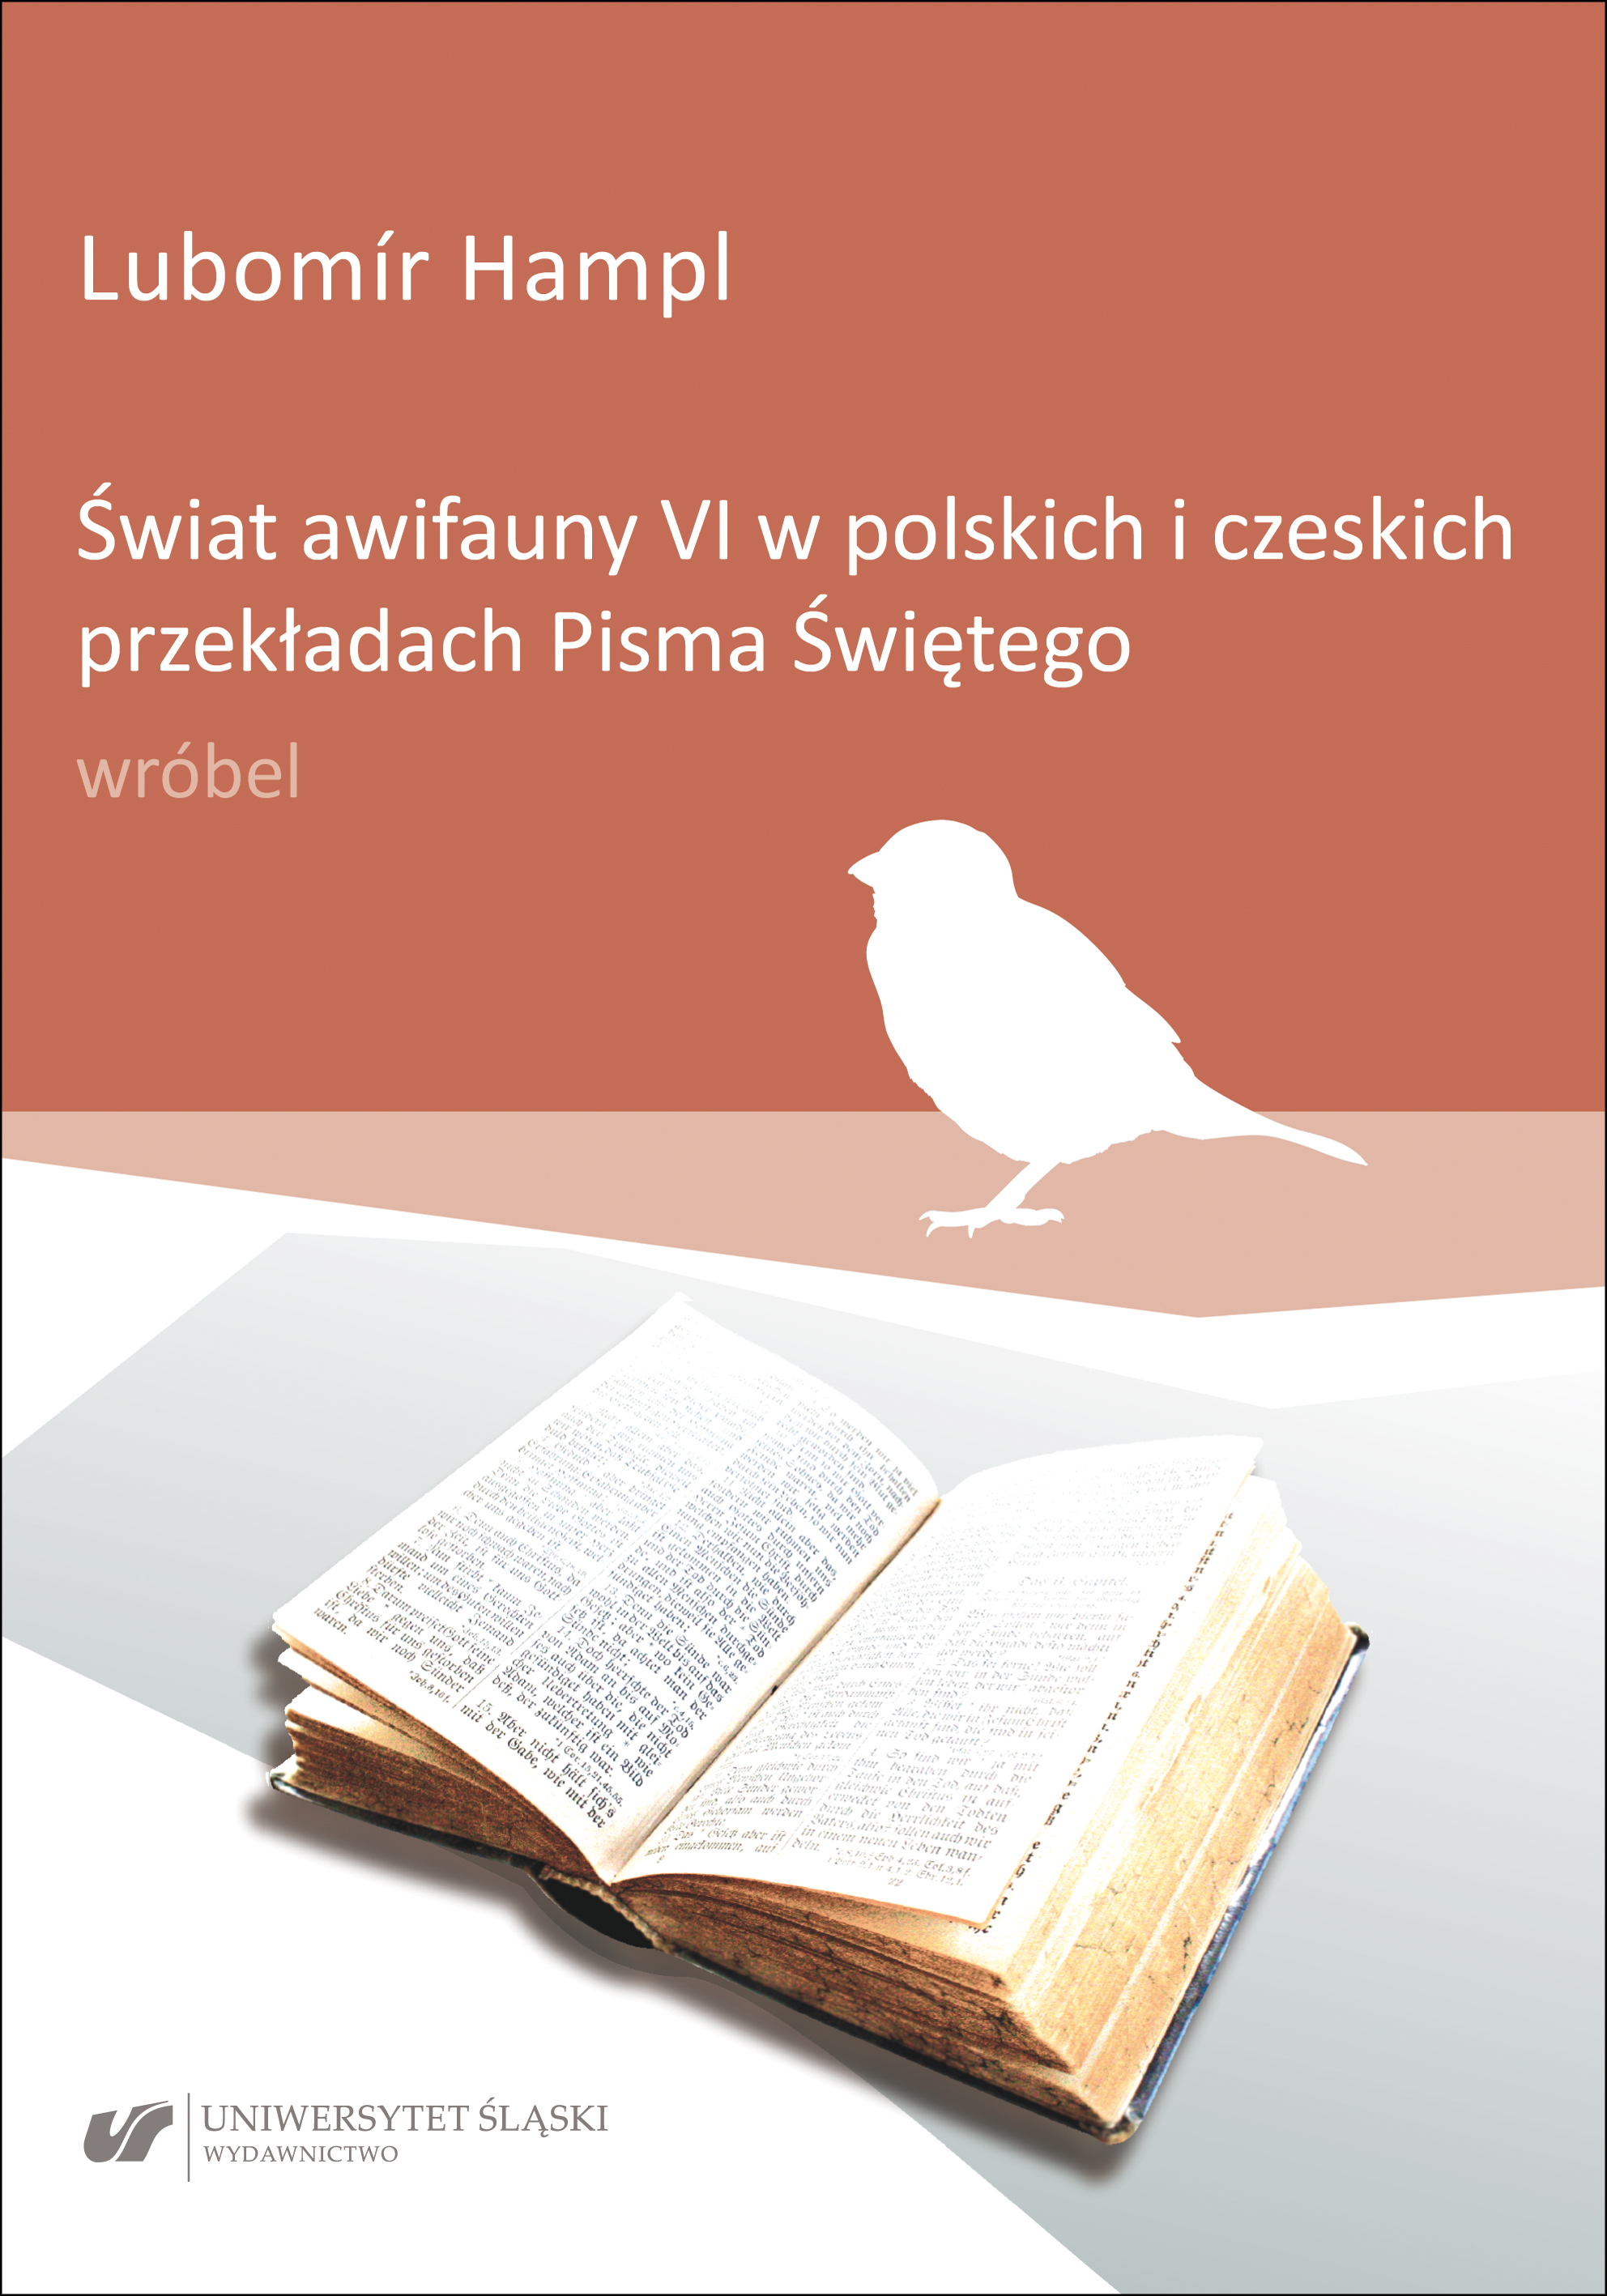 The world of avifauna VI in Polish and Czech translations of the Holy Bible (Sparrow)